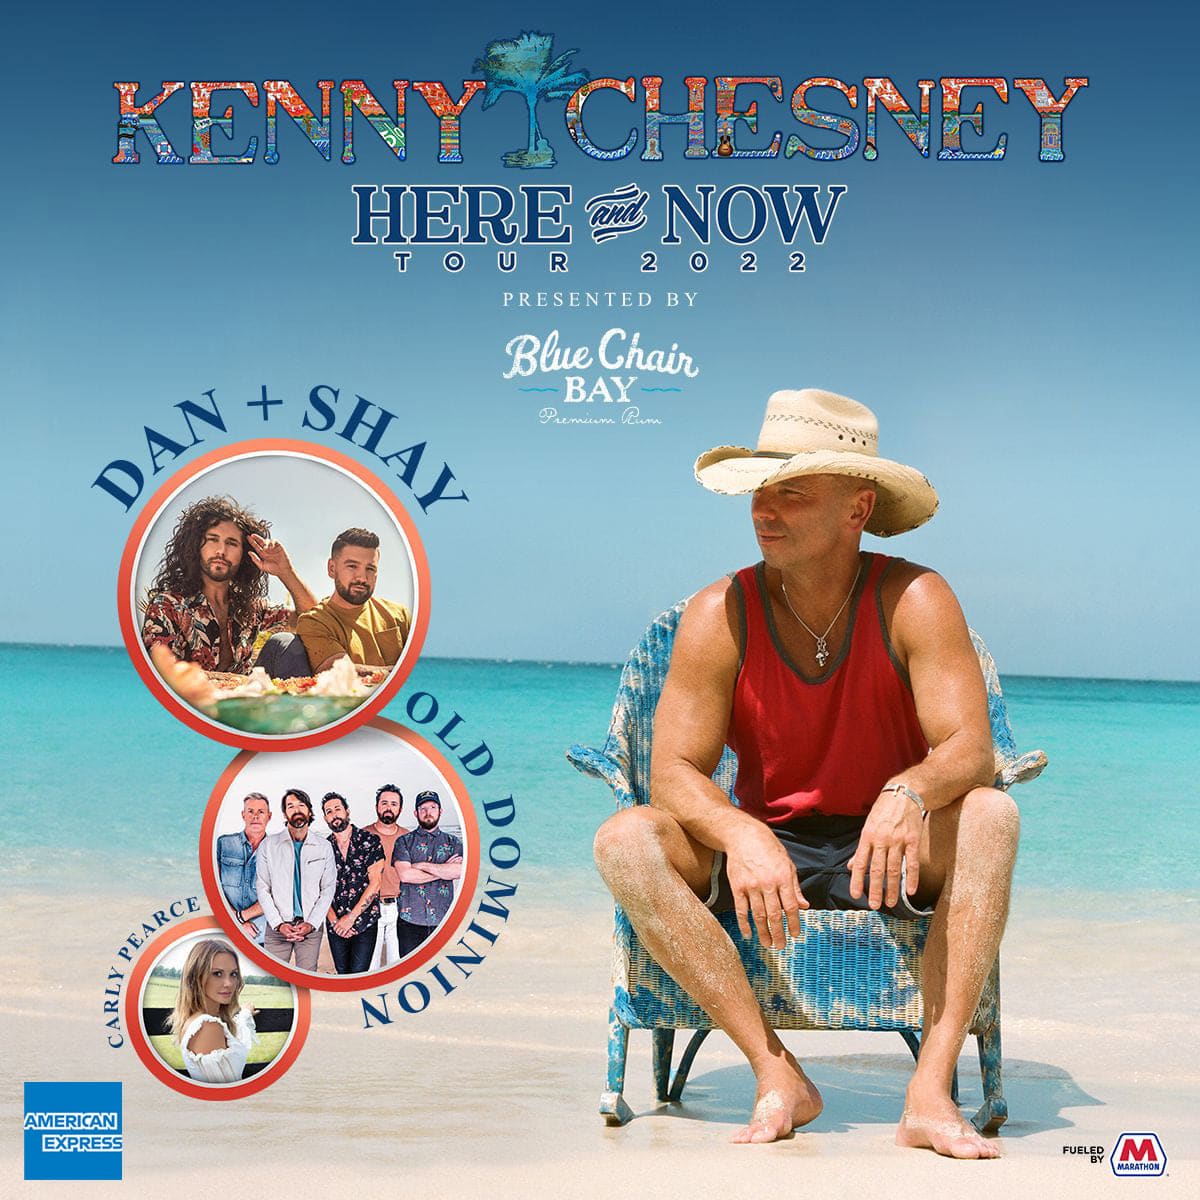 Kenny Chesney brought his mom onstage for his Denver show on his "Here and Now" tour in 2022